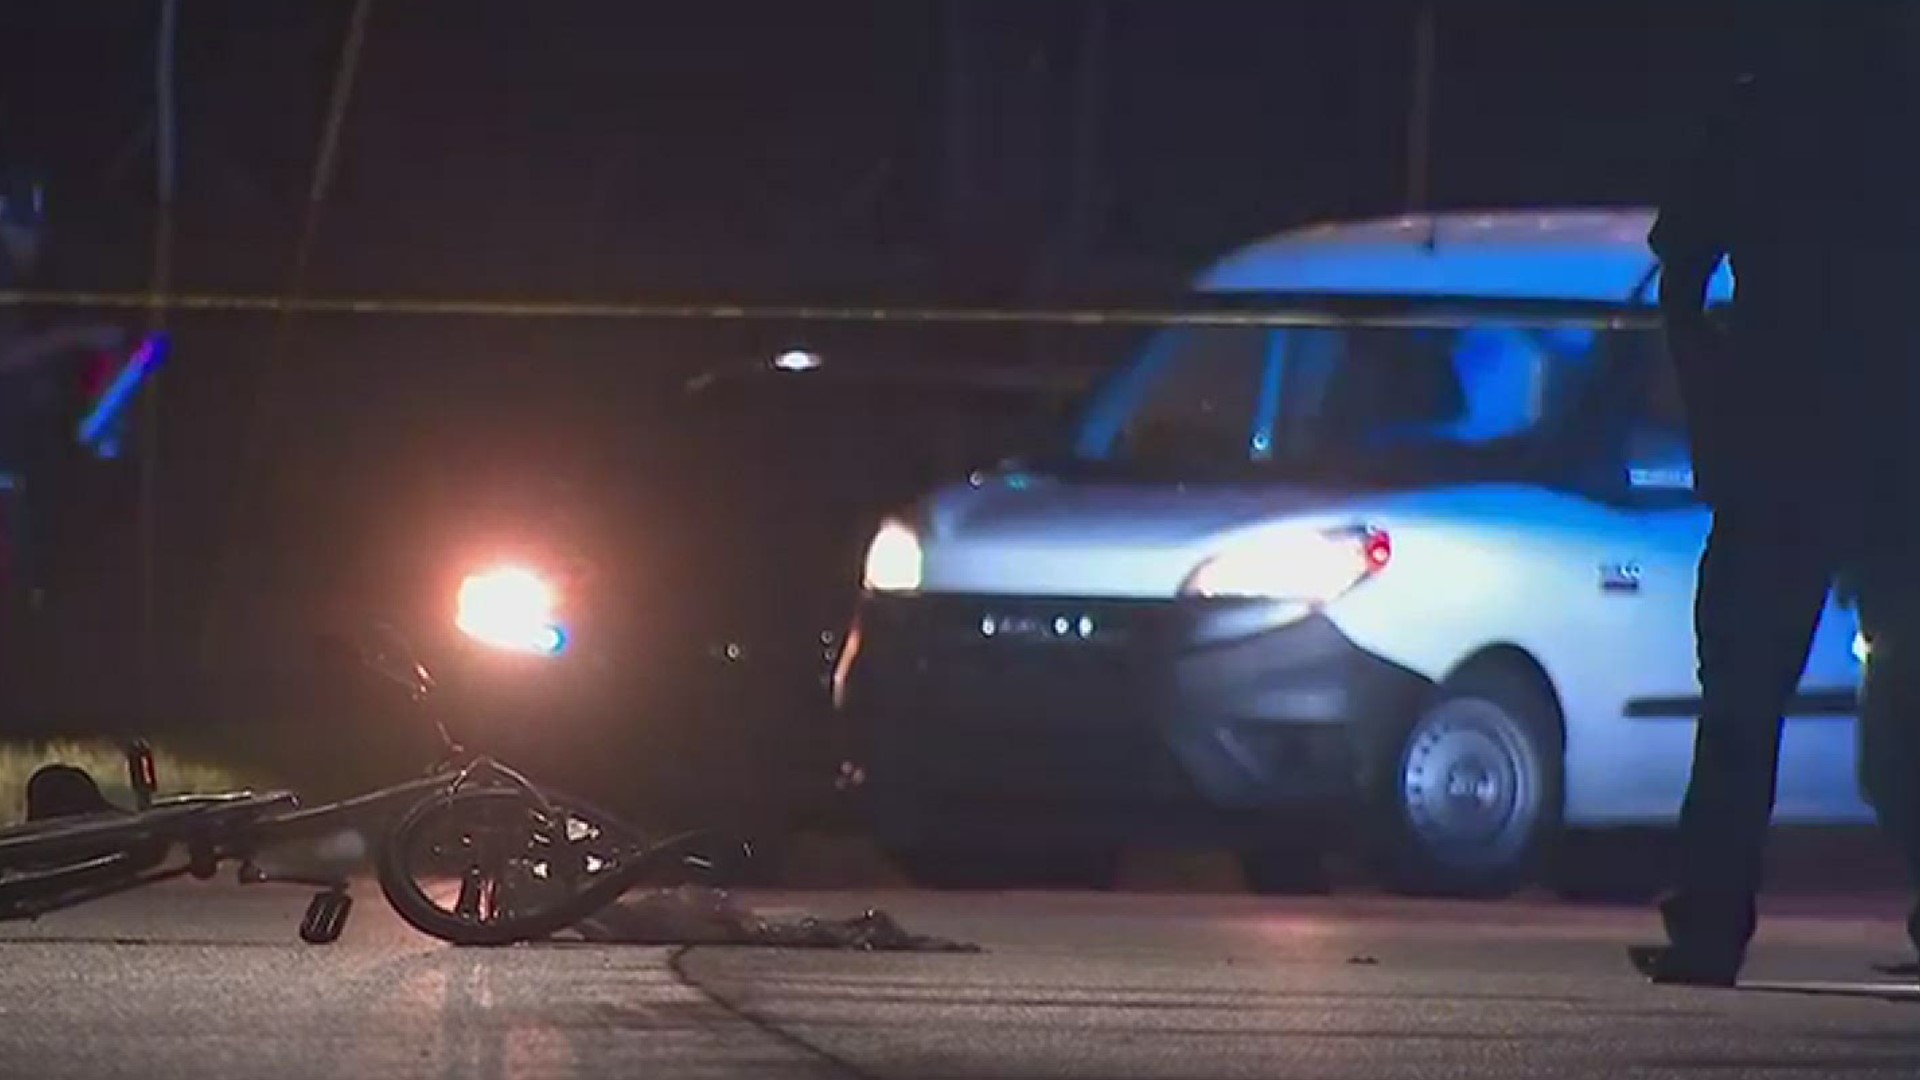 Police said a cyclist was critically hurt when he was struck by a hit-and-run driver on Northside Drive, N.W., late Sunday night.